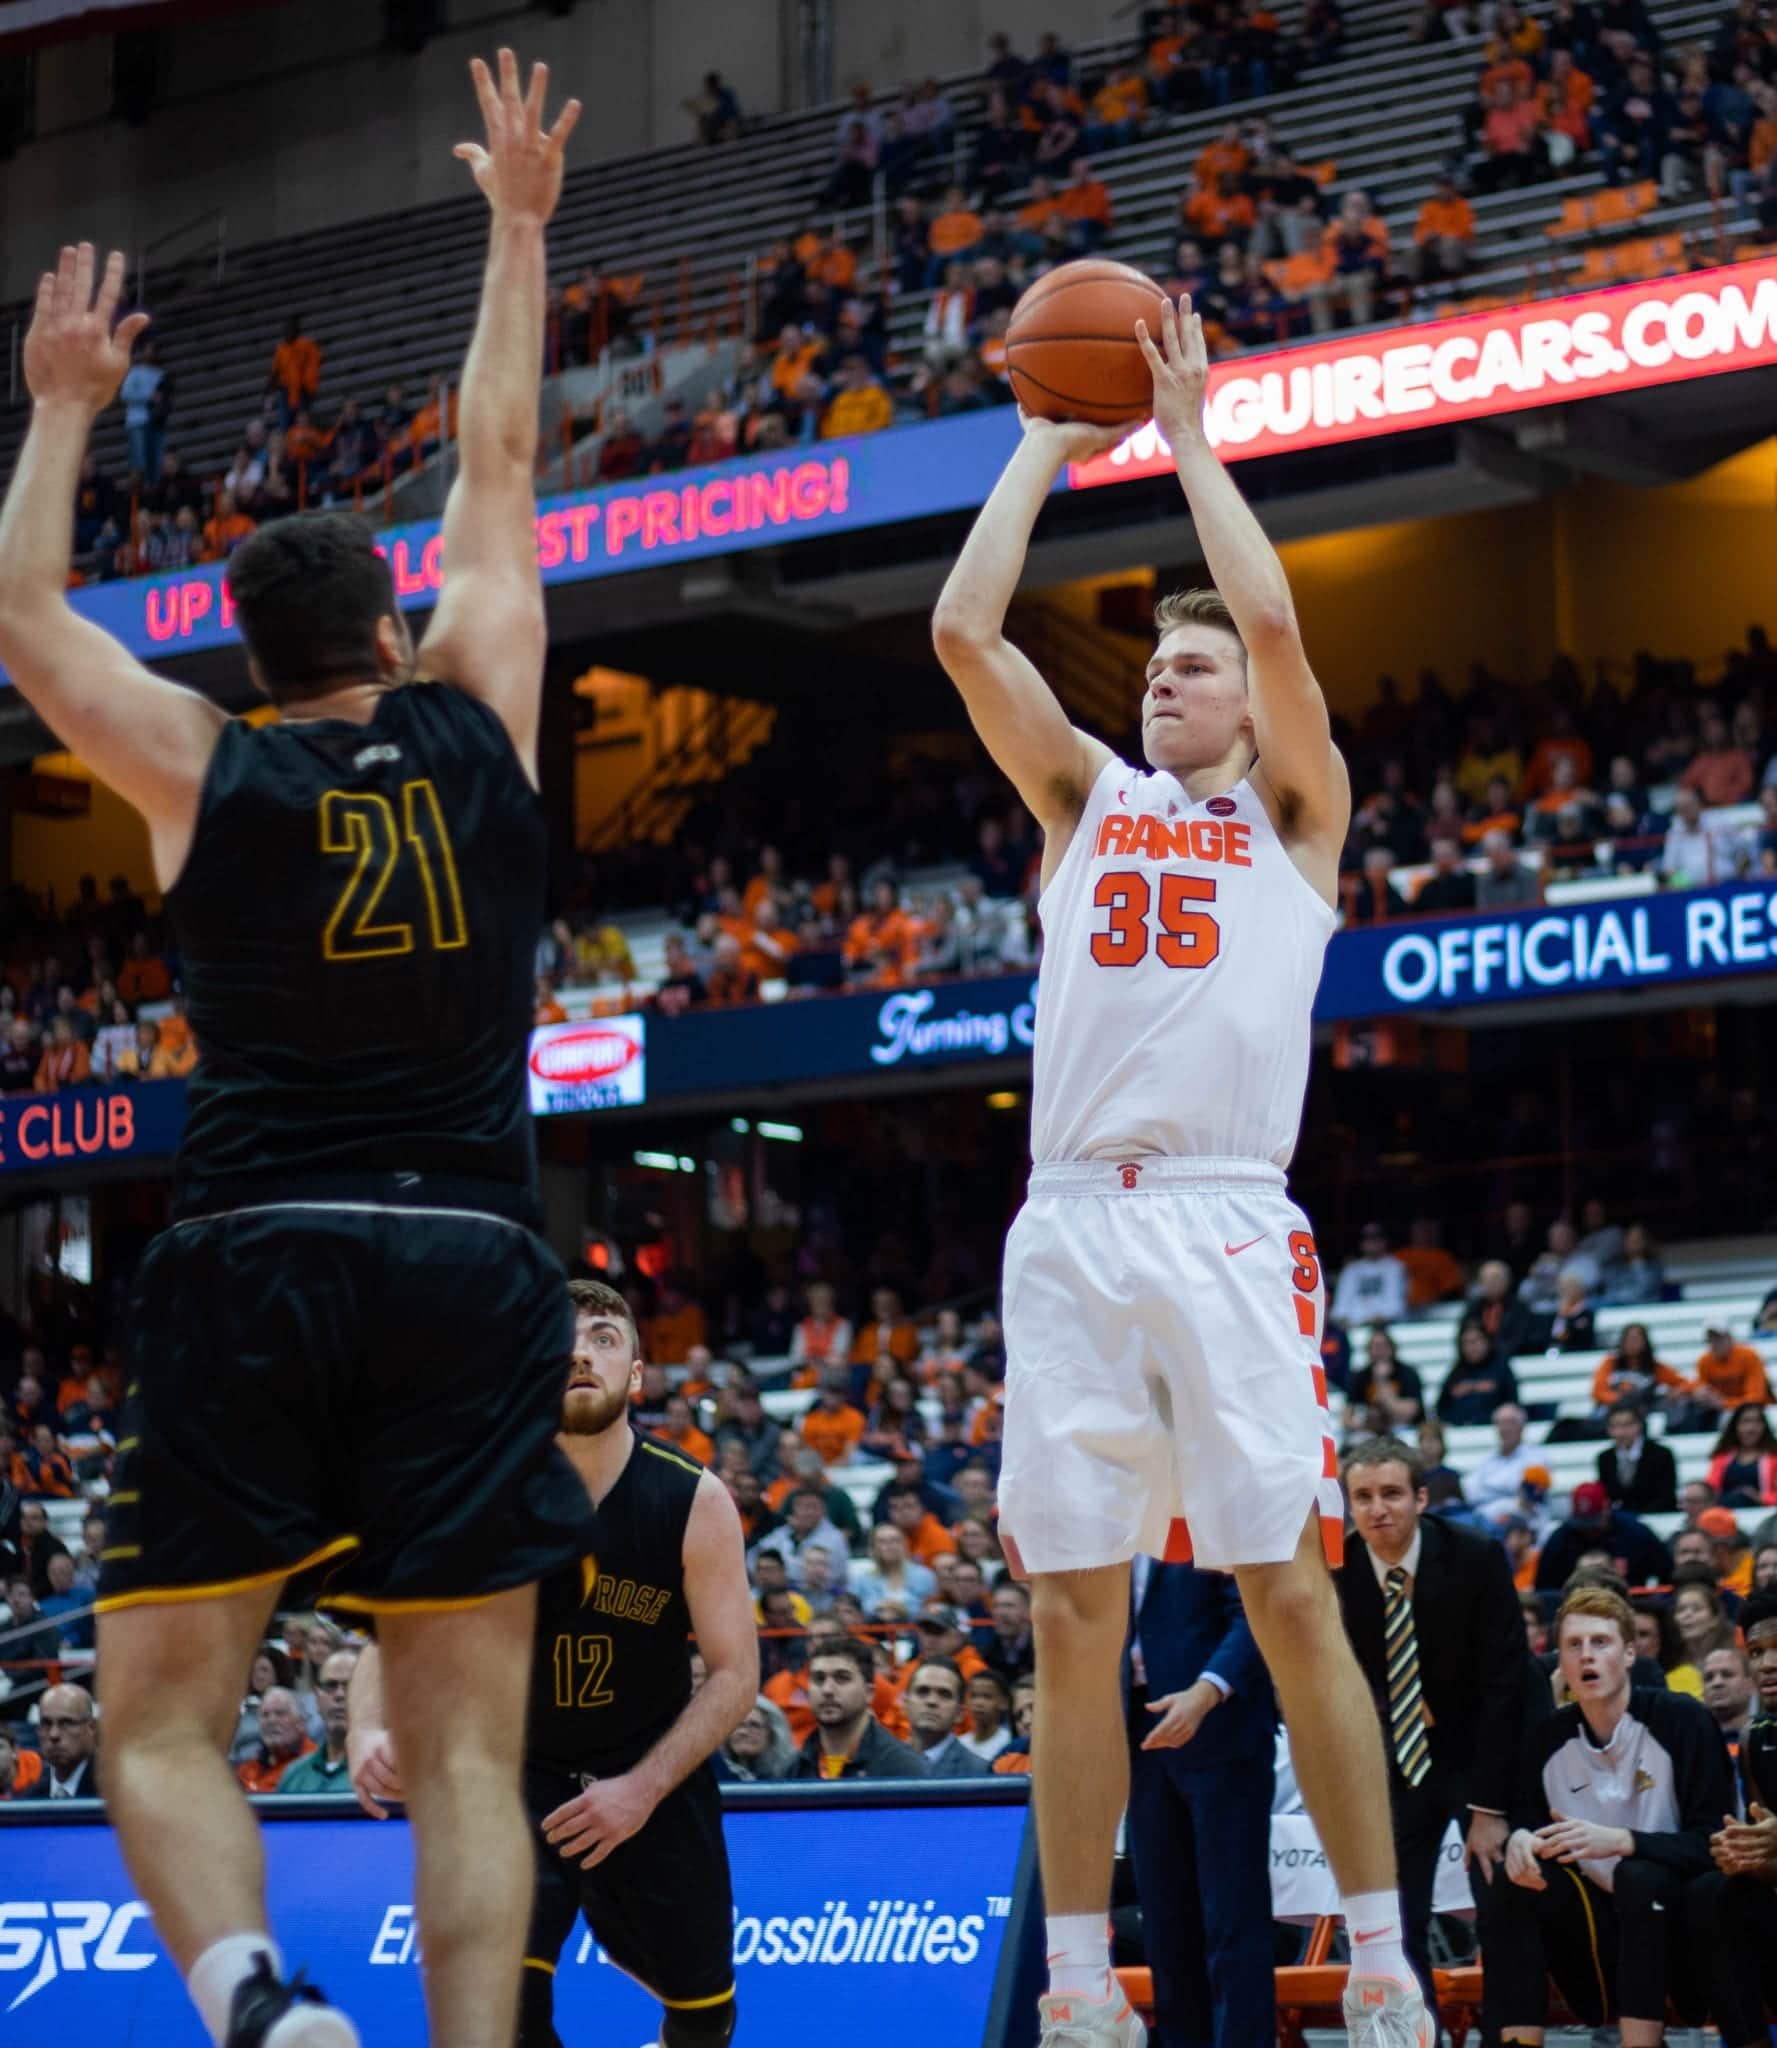 Buddy Boeheim shoots over a Saint Rose defender. Boeheim finished with 19 points in his Syracuse debut.